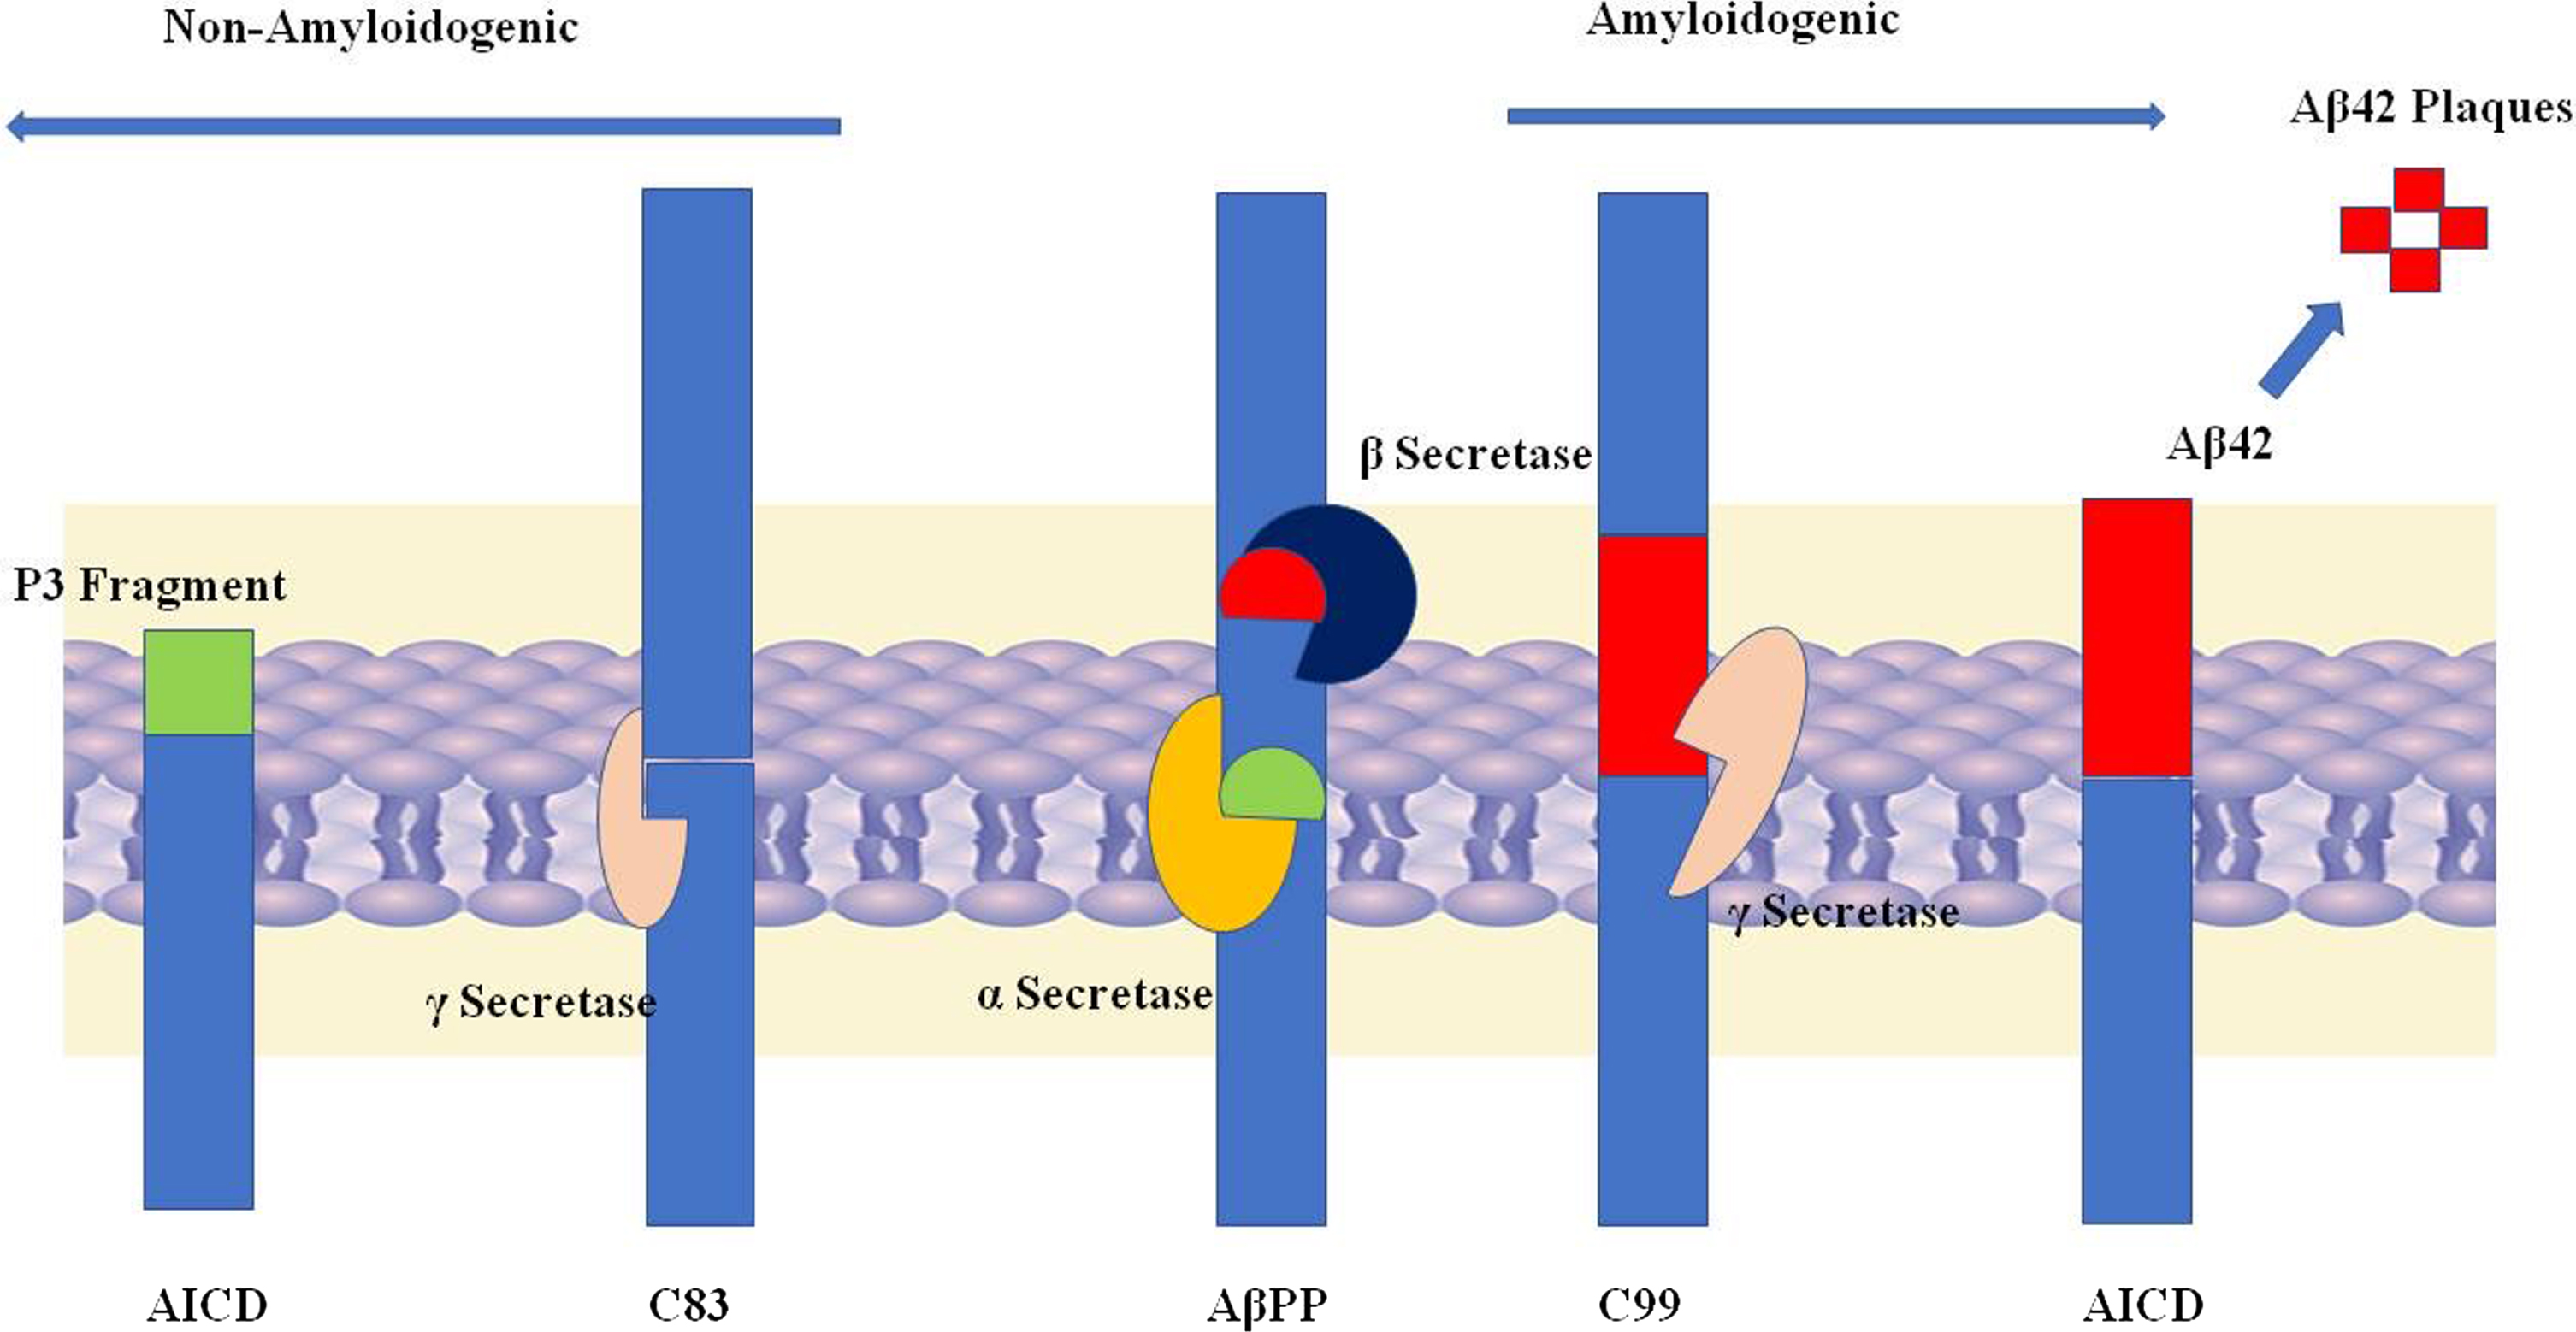 In most of the cases, AβPP undergoes non-amyloidogenic processing through a consecutive cleavage by α- and γ-secretase. The α-secretase cleaves 639 amino acids longer AβPP into 83 amino acid fragments. γ-secretase further processes those fragments and generates a P3 fragment which has a role in signal transduction [2]. Alternatively, in case of amyloidogenic processing the AβPP is firstly cleaved by β-secretase (BACE 1) and then by γ-secretase. The β-secretase at first generates 99 amino acid long fragments which are cleaved by γ-secretase further. In 90% cases 40 amino acids long, amyloid-β is generated which is harmless, but in rarest condition, 42 amino longer amyloid-β is formed whose accumulation becomes a triggering cause of a neurodegenerative disease, i.e., Alzheimer’s disease [8].